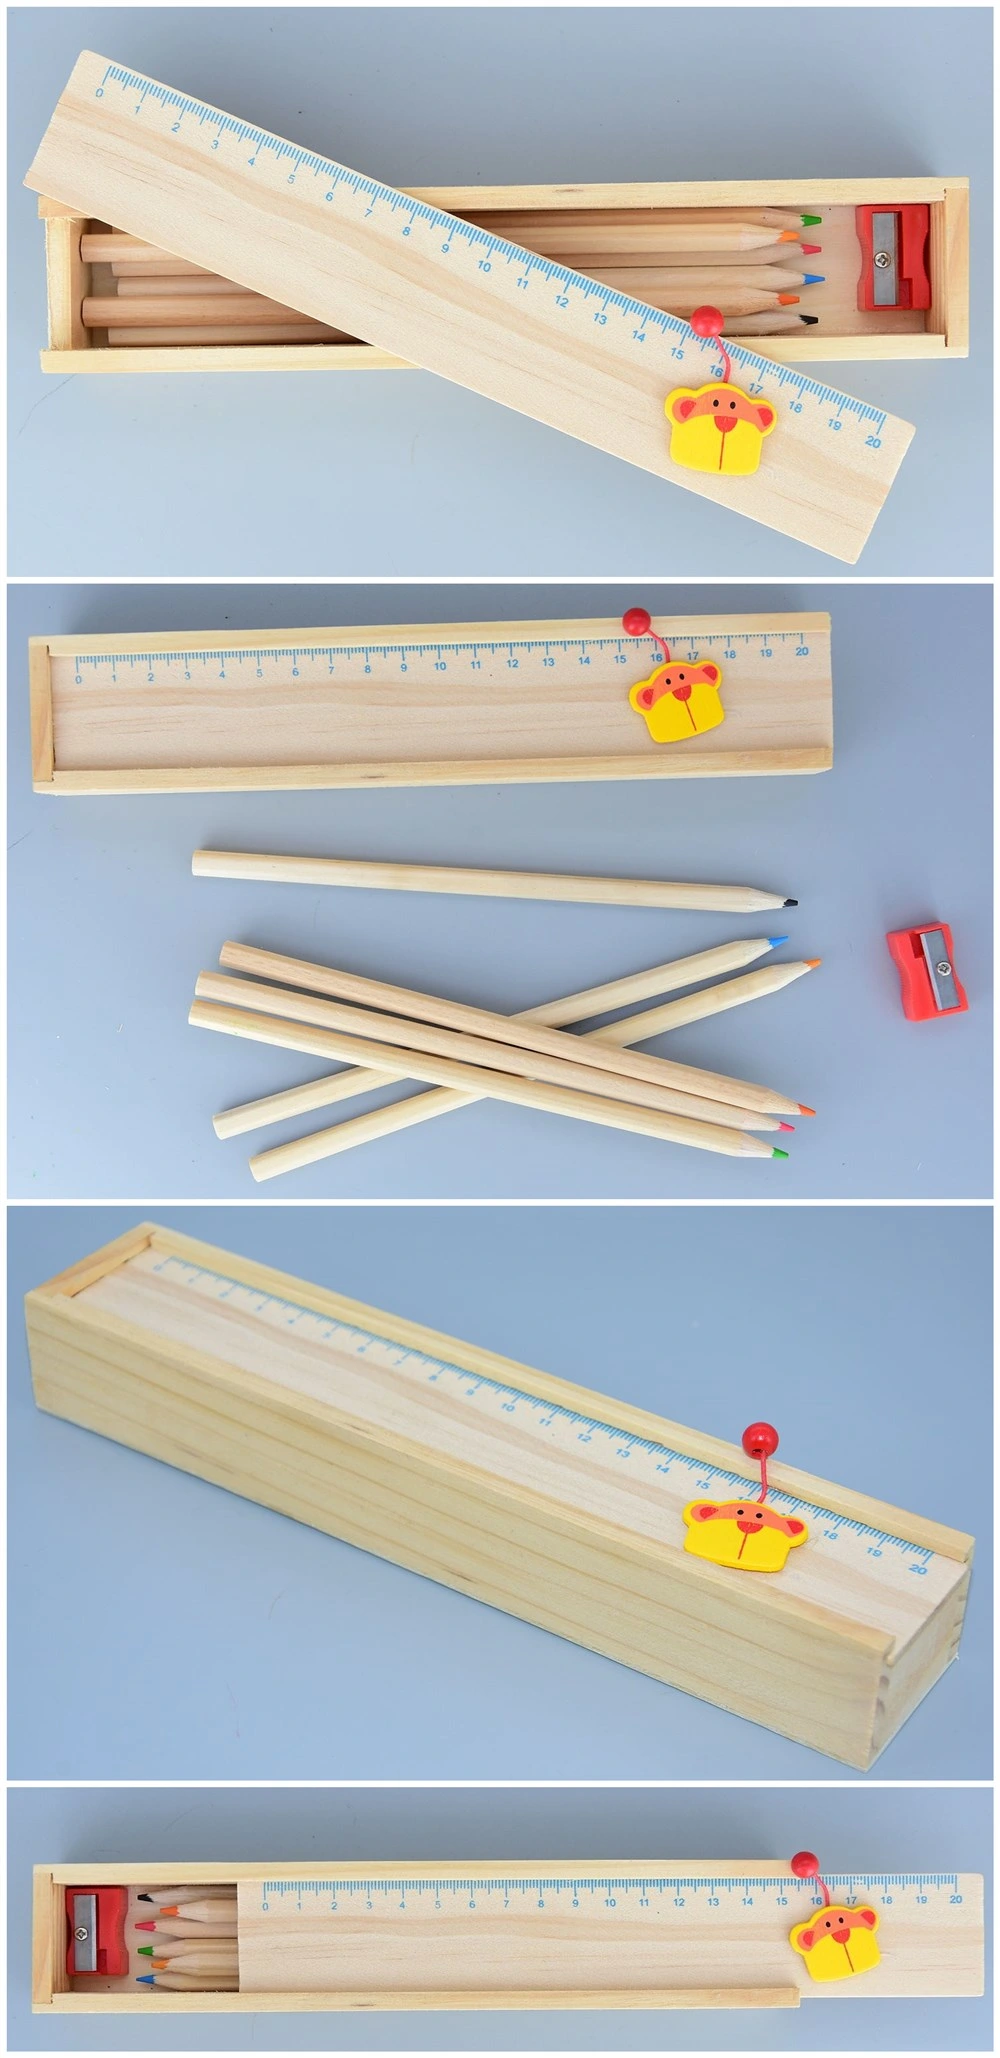 7 Inch 6 PCS Wooden Color Pencils with Sharpener/Eraser in Wooden Box with Wooden Toy